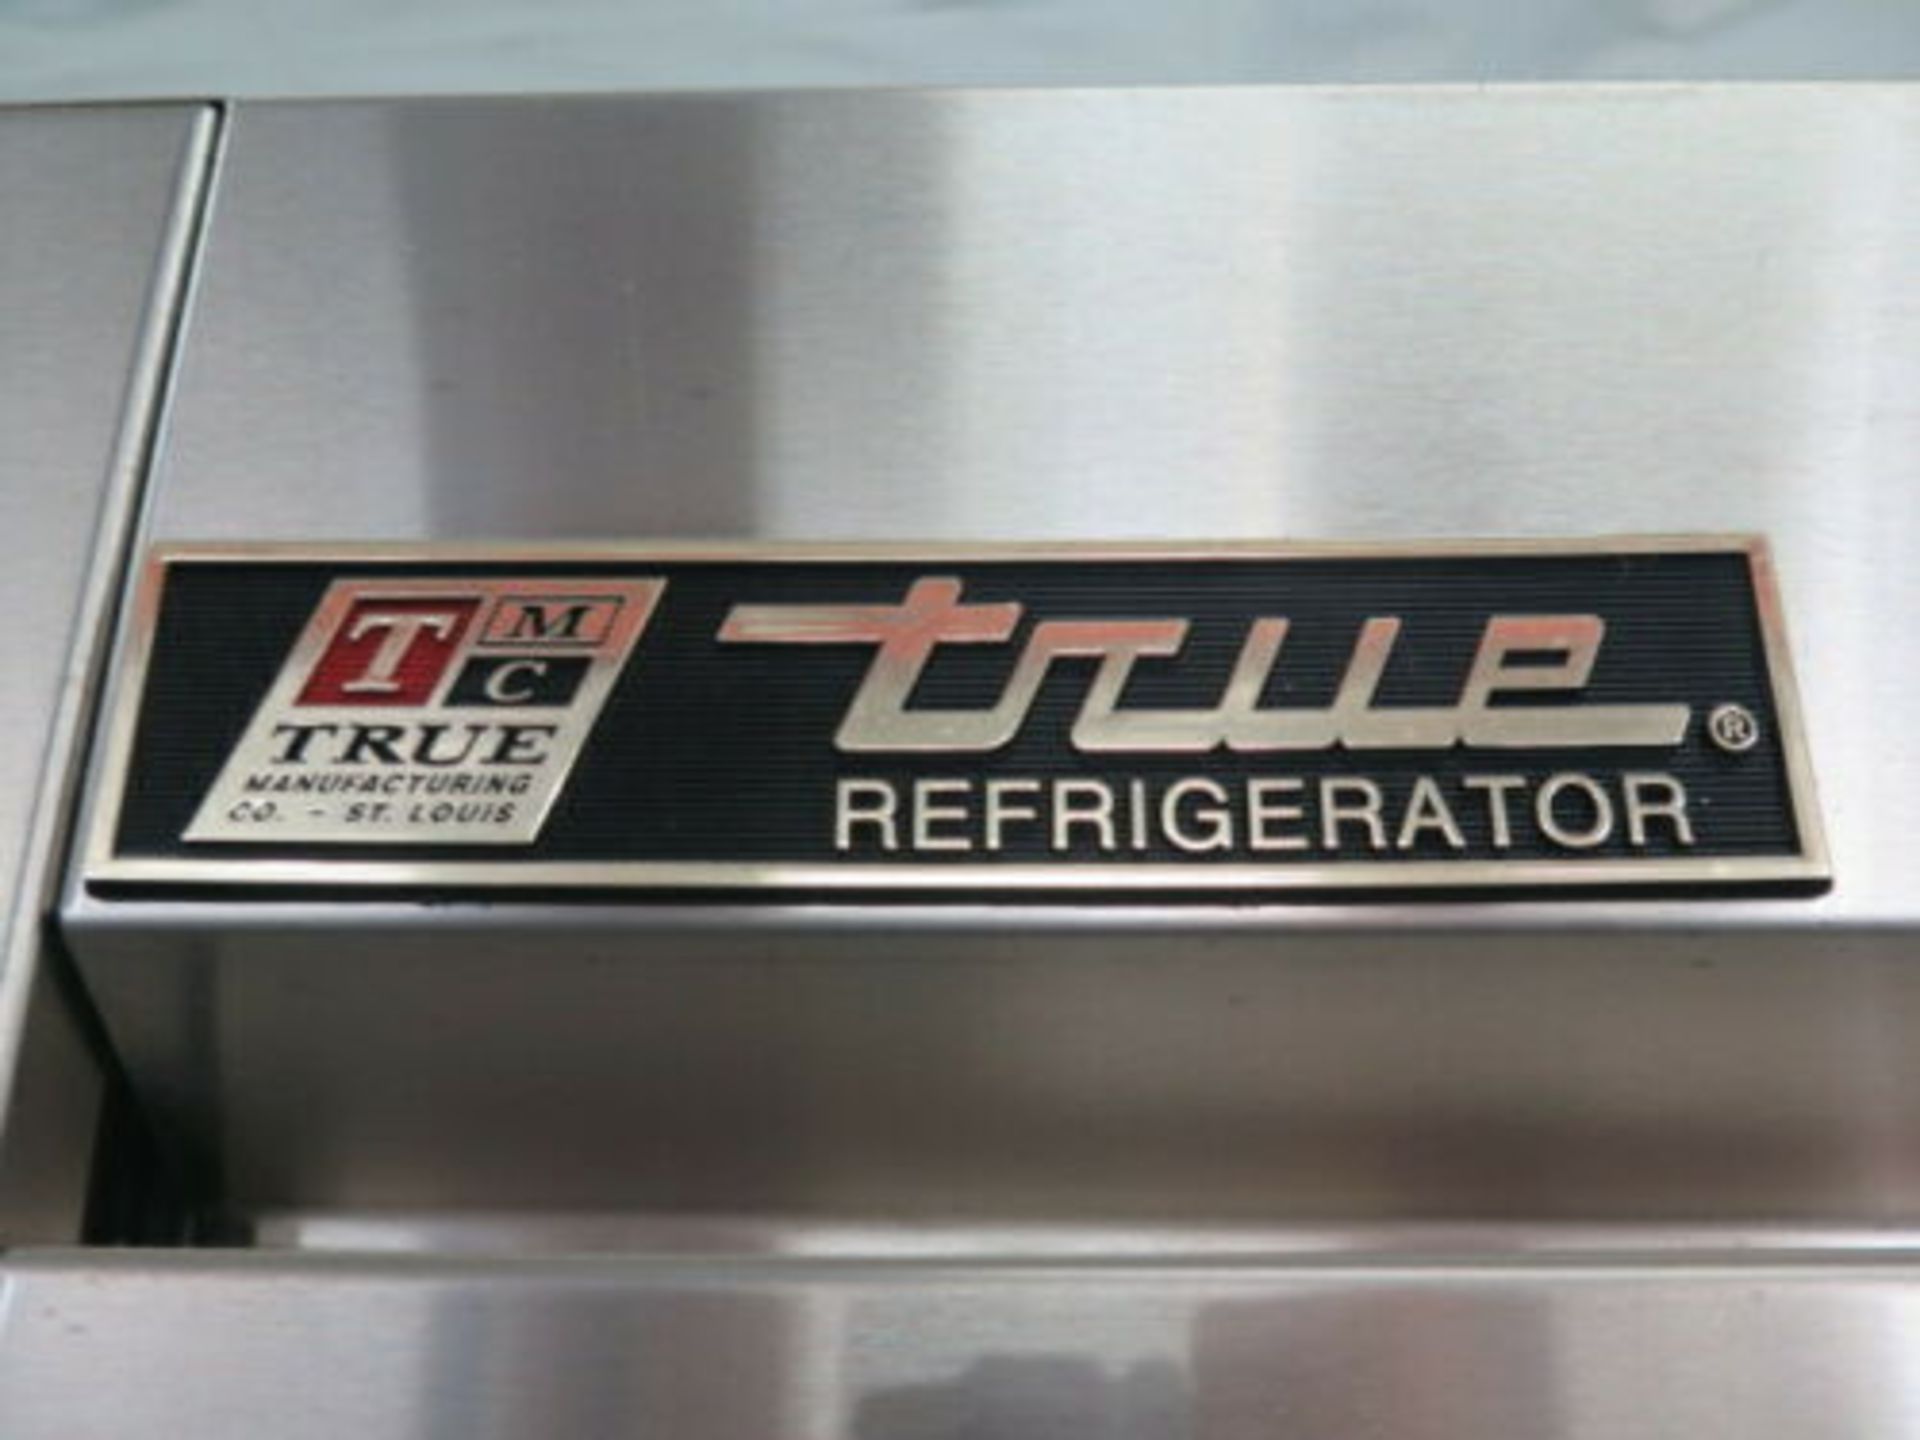 True Mfg. mdl. T-72G-6 6-Door Stainless Steel and Glass Industrial Refrigerator s/n 1-4583449 - Image 4 of 9